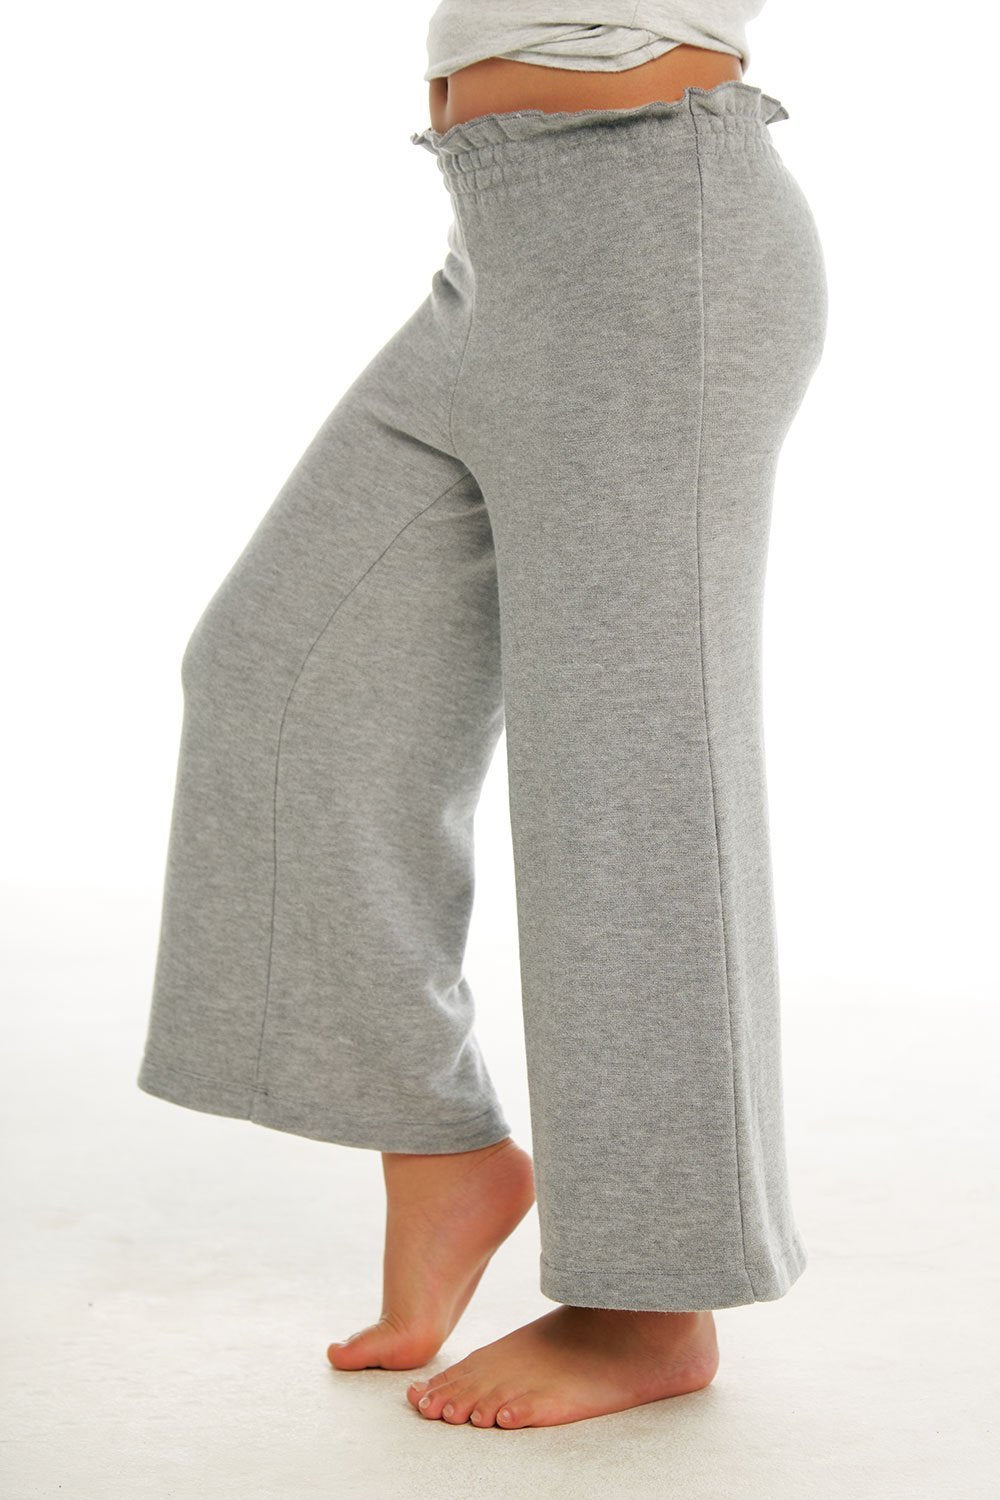 CHASER KIDS - Girls Cozy Knit Paperbag Waist Wide Leg Pant in Heather Grey